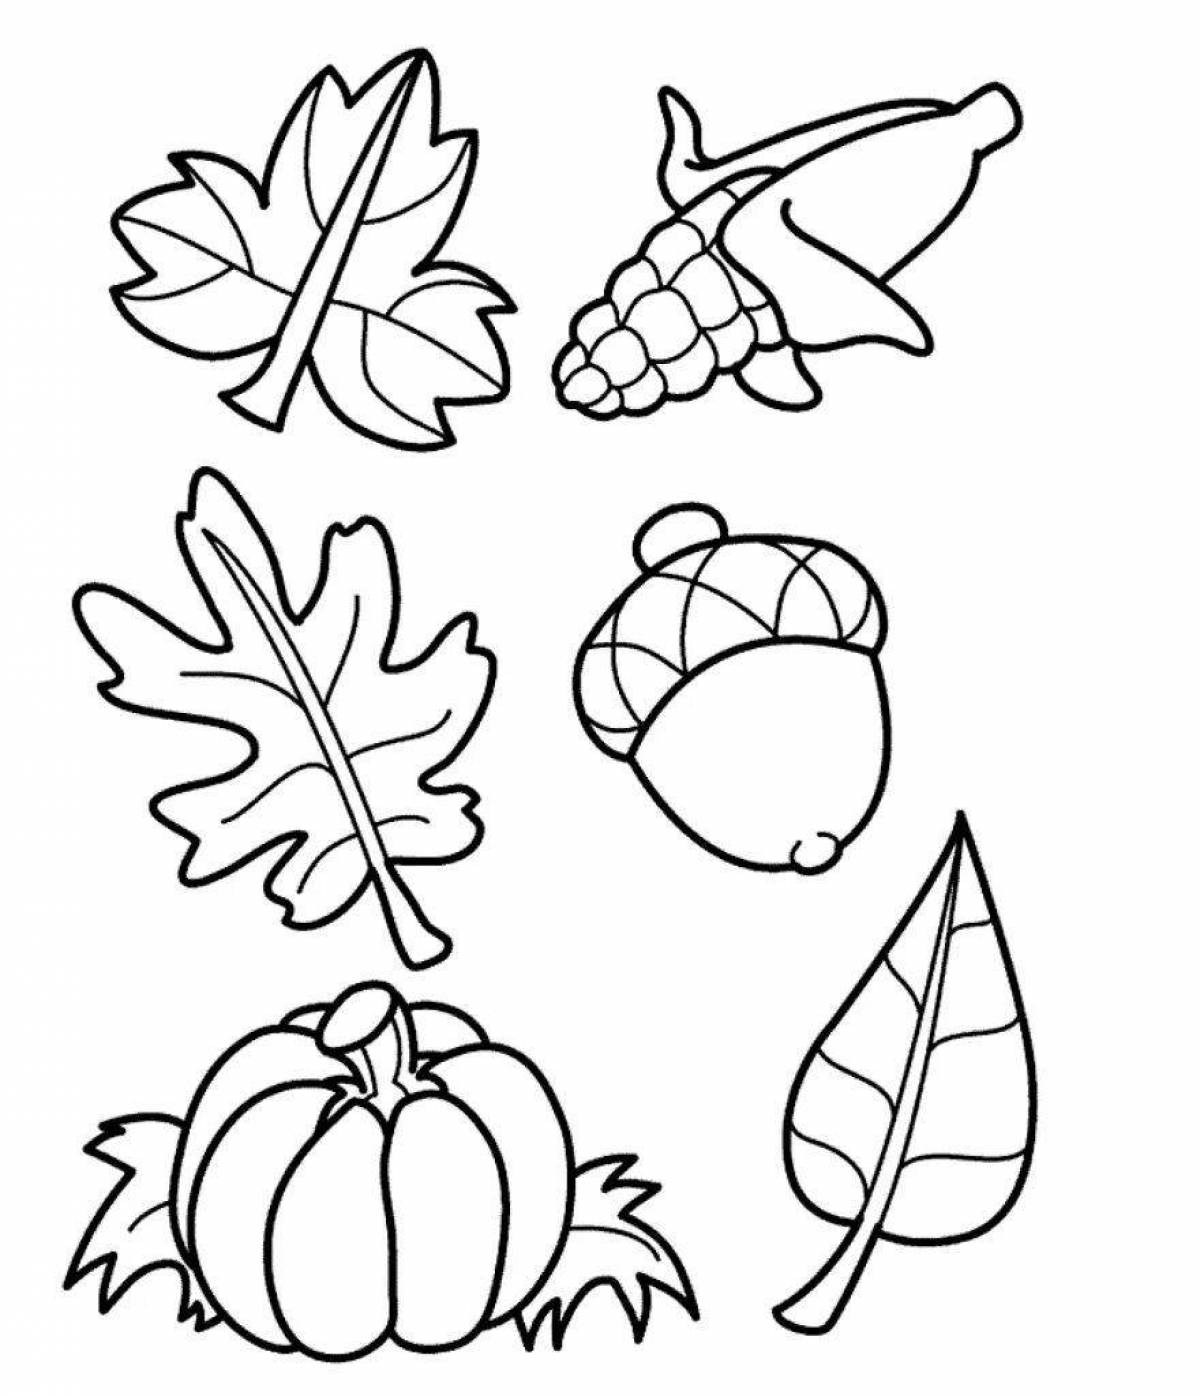 Fantastic autumn coloring book for 3-4 year olds